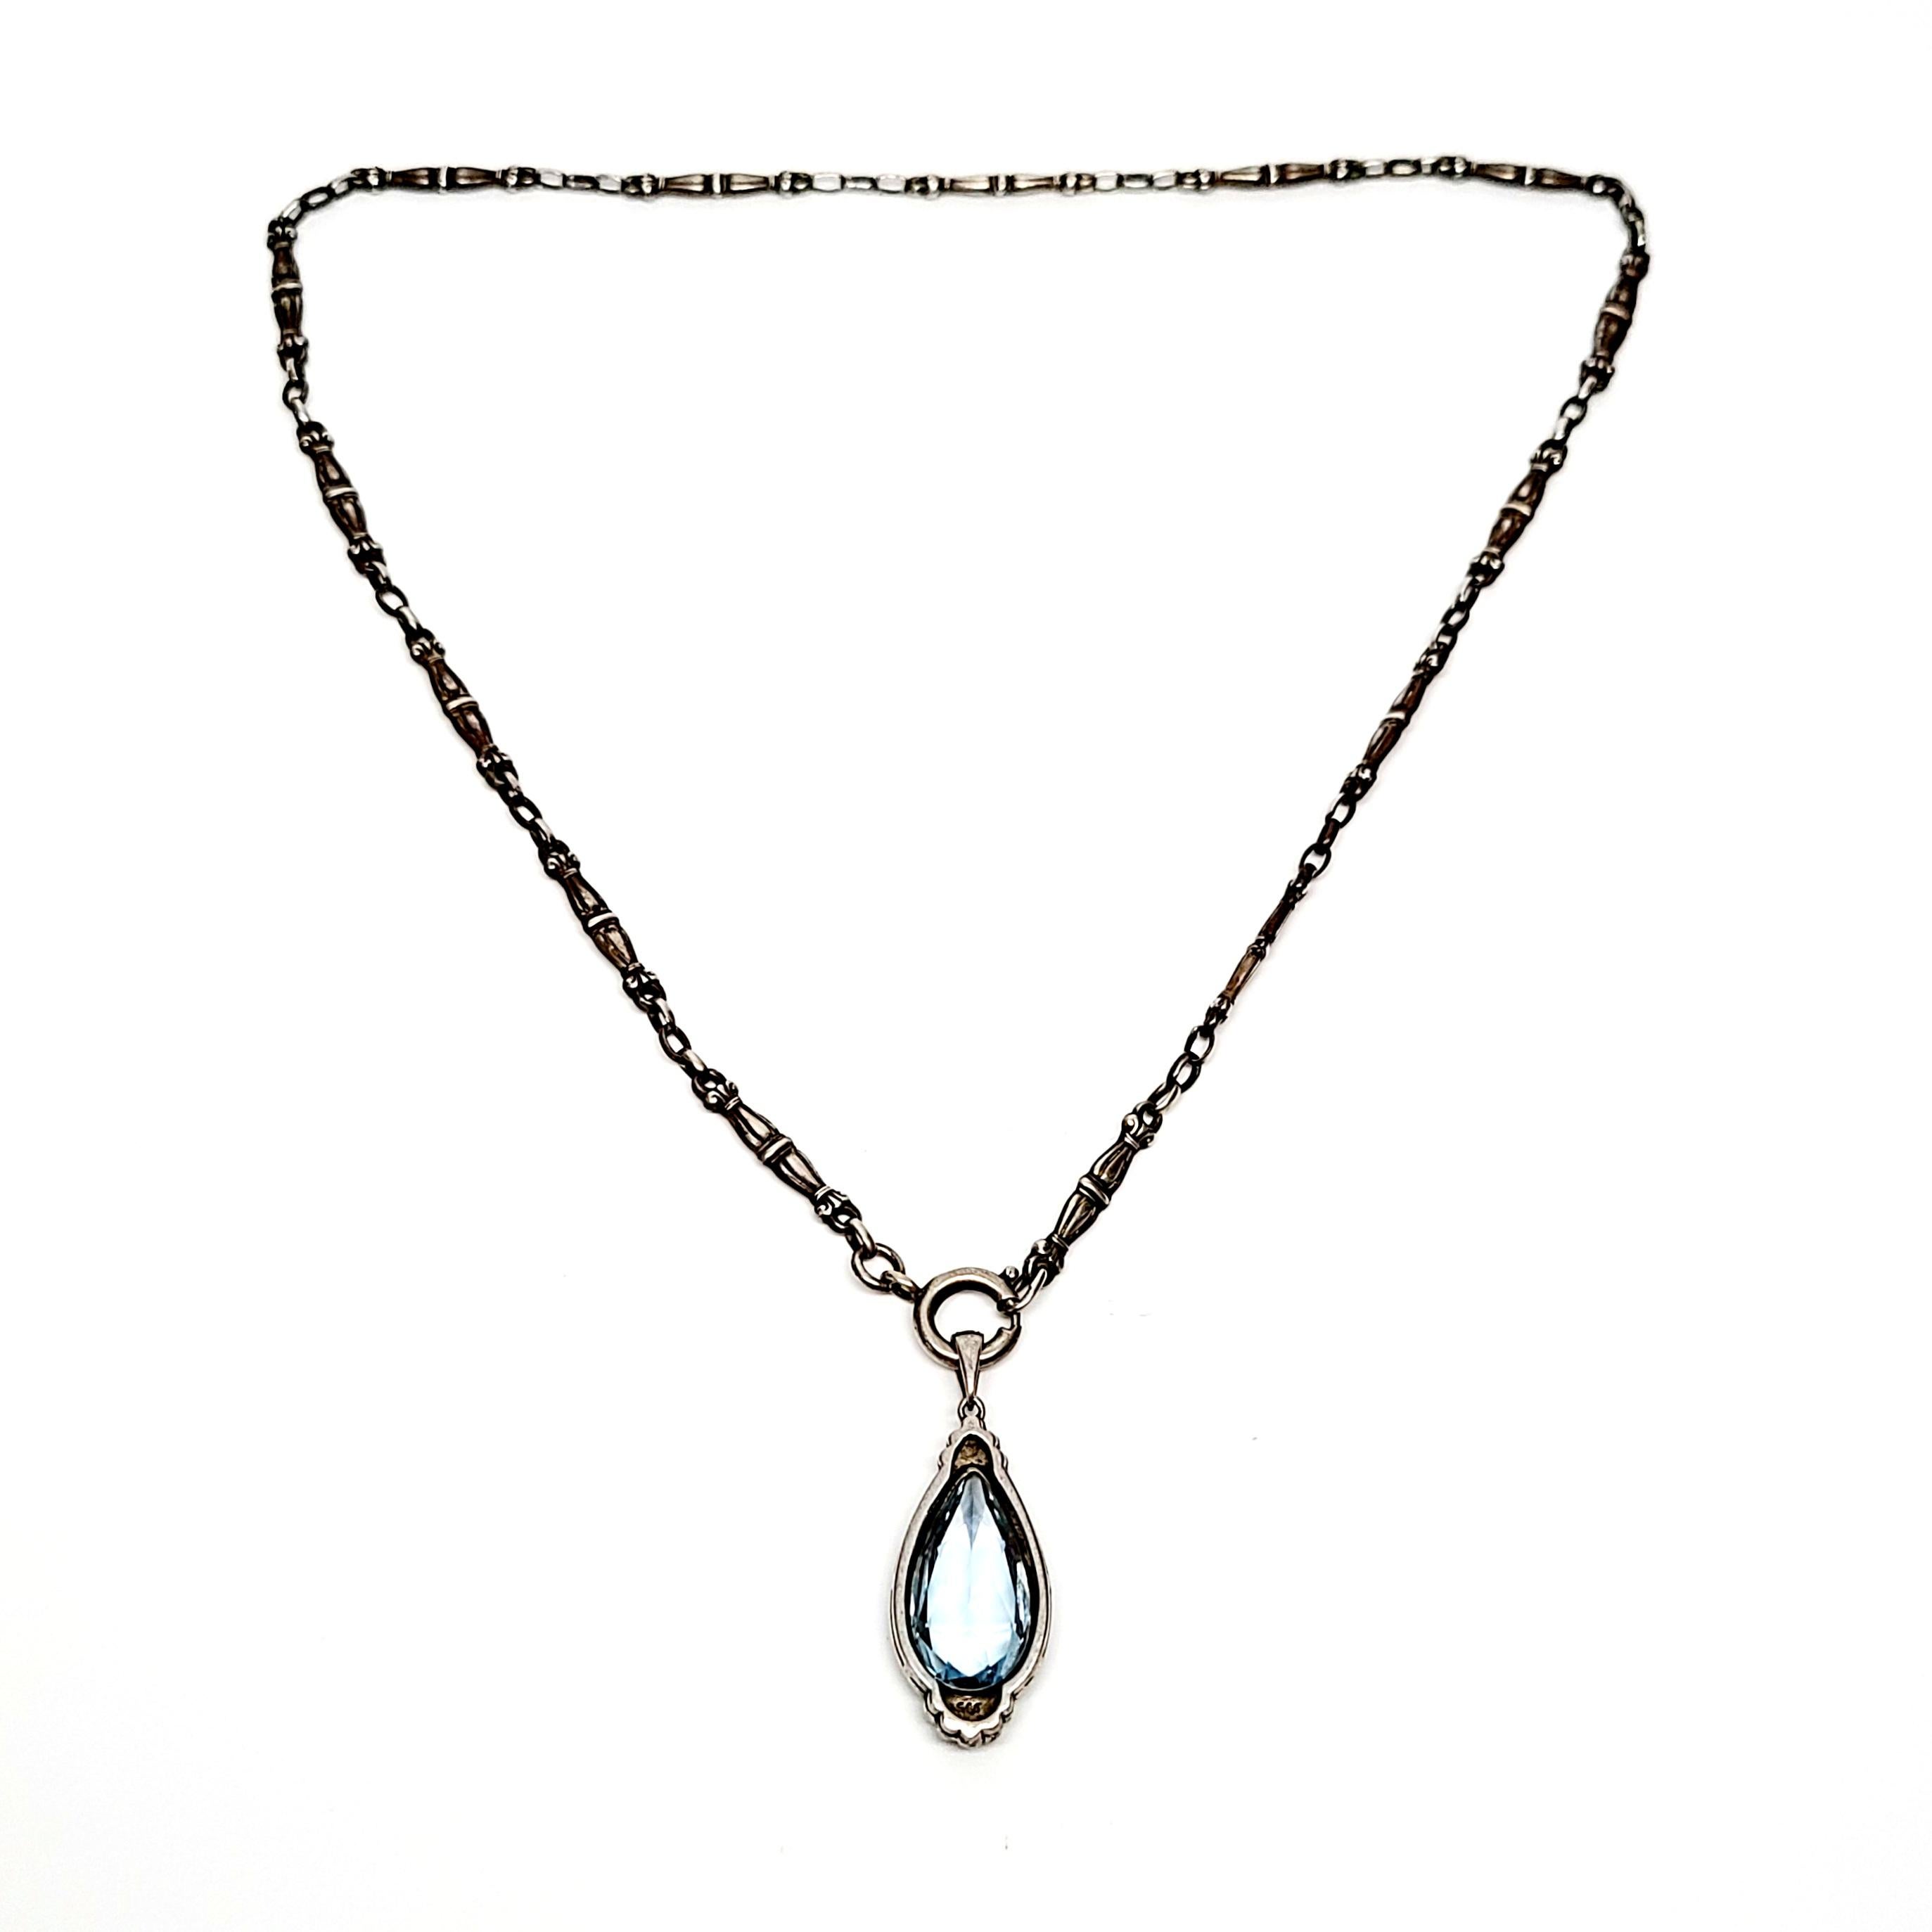 935 silver aquamarine pendant on 800 silver bookchain necklace.

A teardrop aquamarine stone is set in an ornate frame that hangs from a bookchain necklace. Links have a double sided design.

Chain measures approx 18 1/2